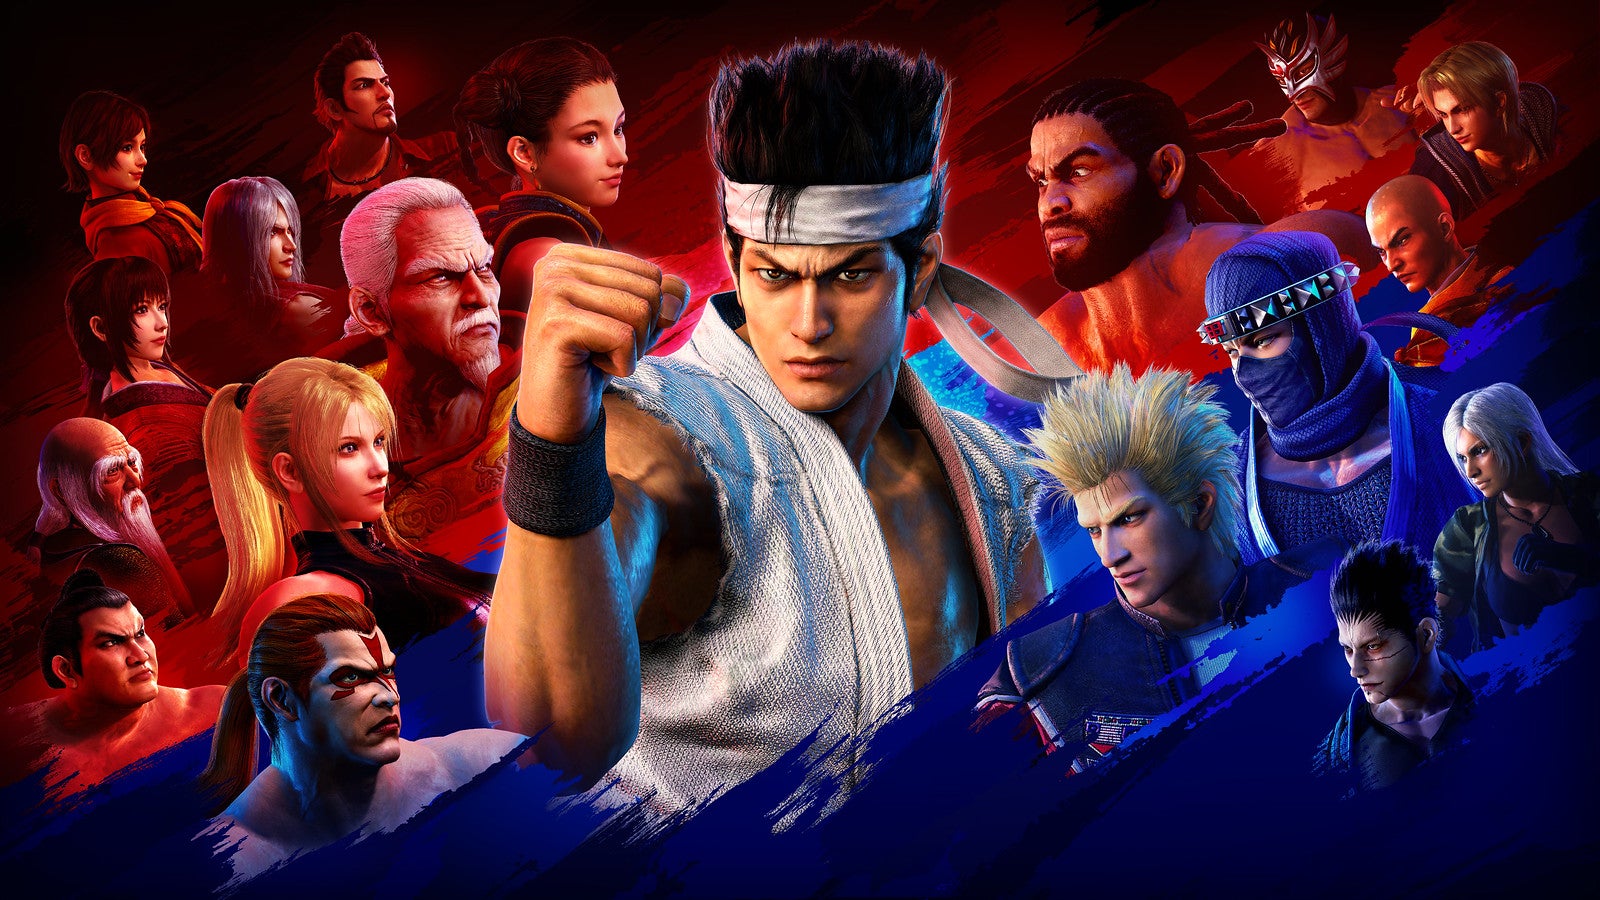 Image for PlayStation Plus games for June include Virtua Fighter 5: Ultimate Showdown, Star Wars: Squadrons